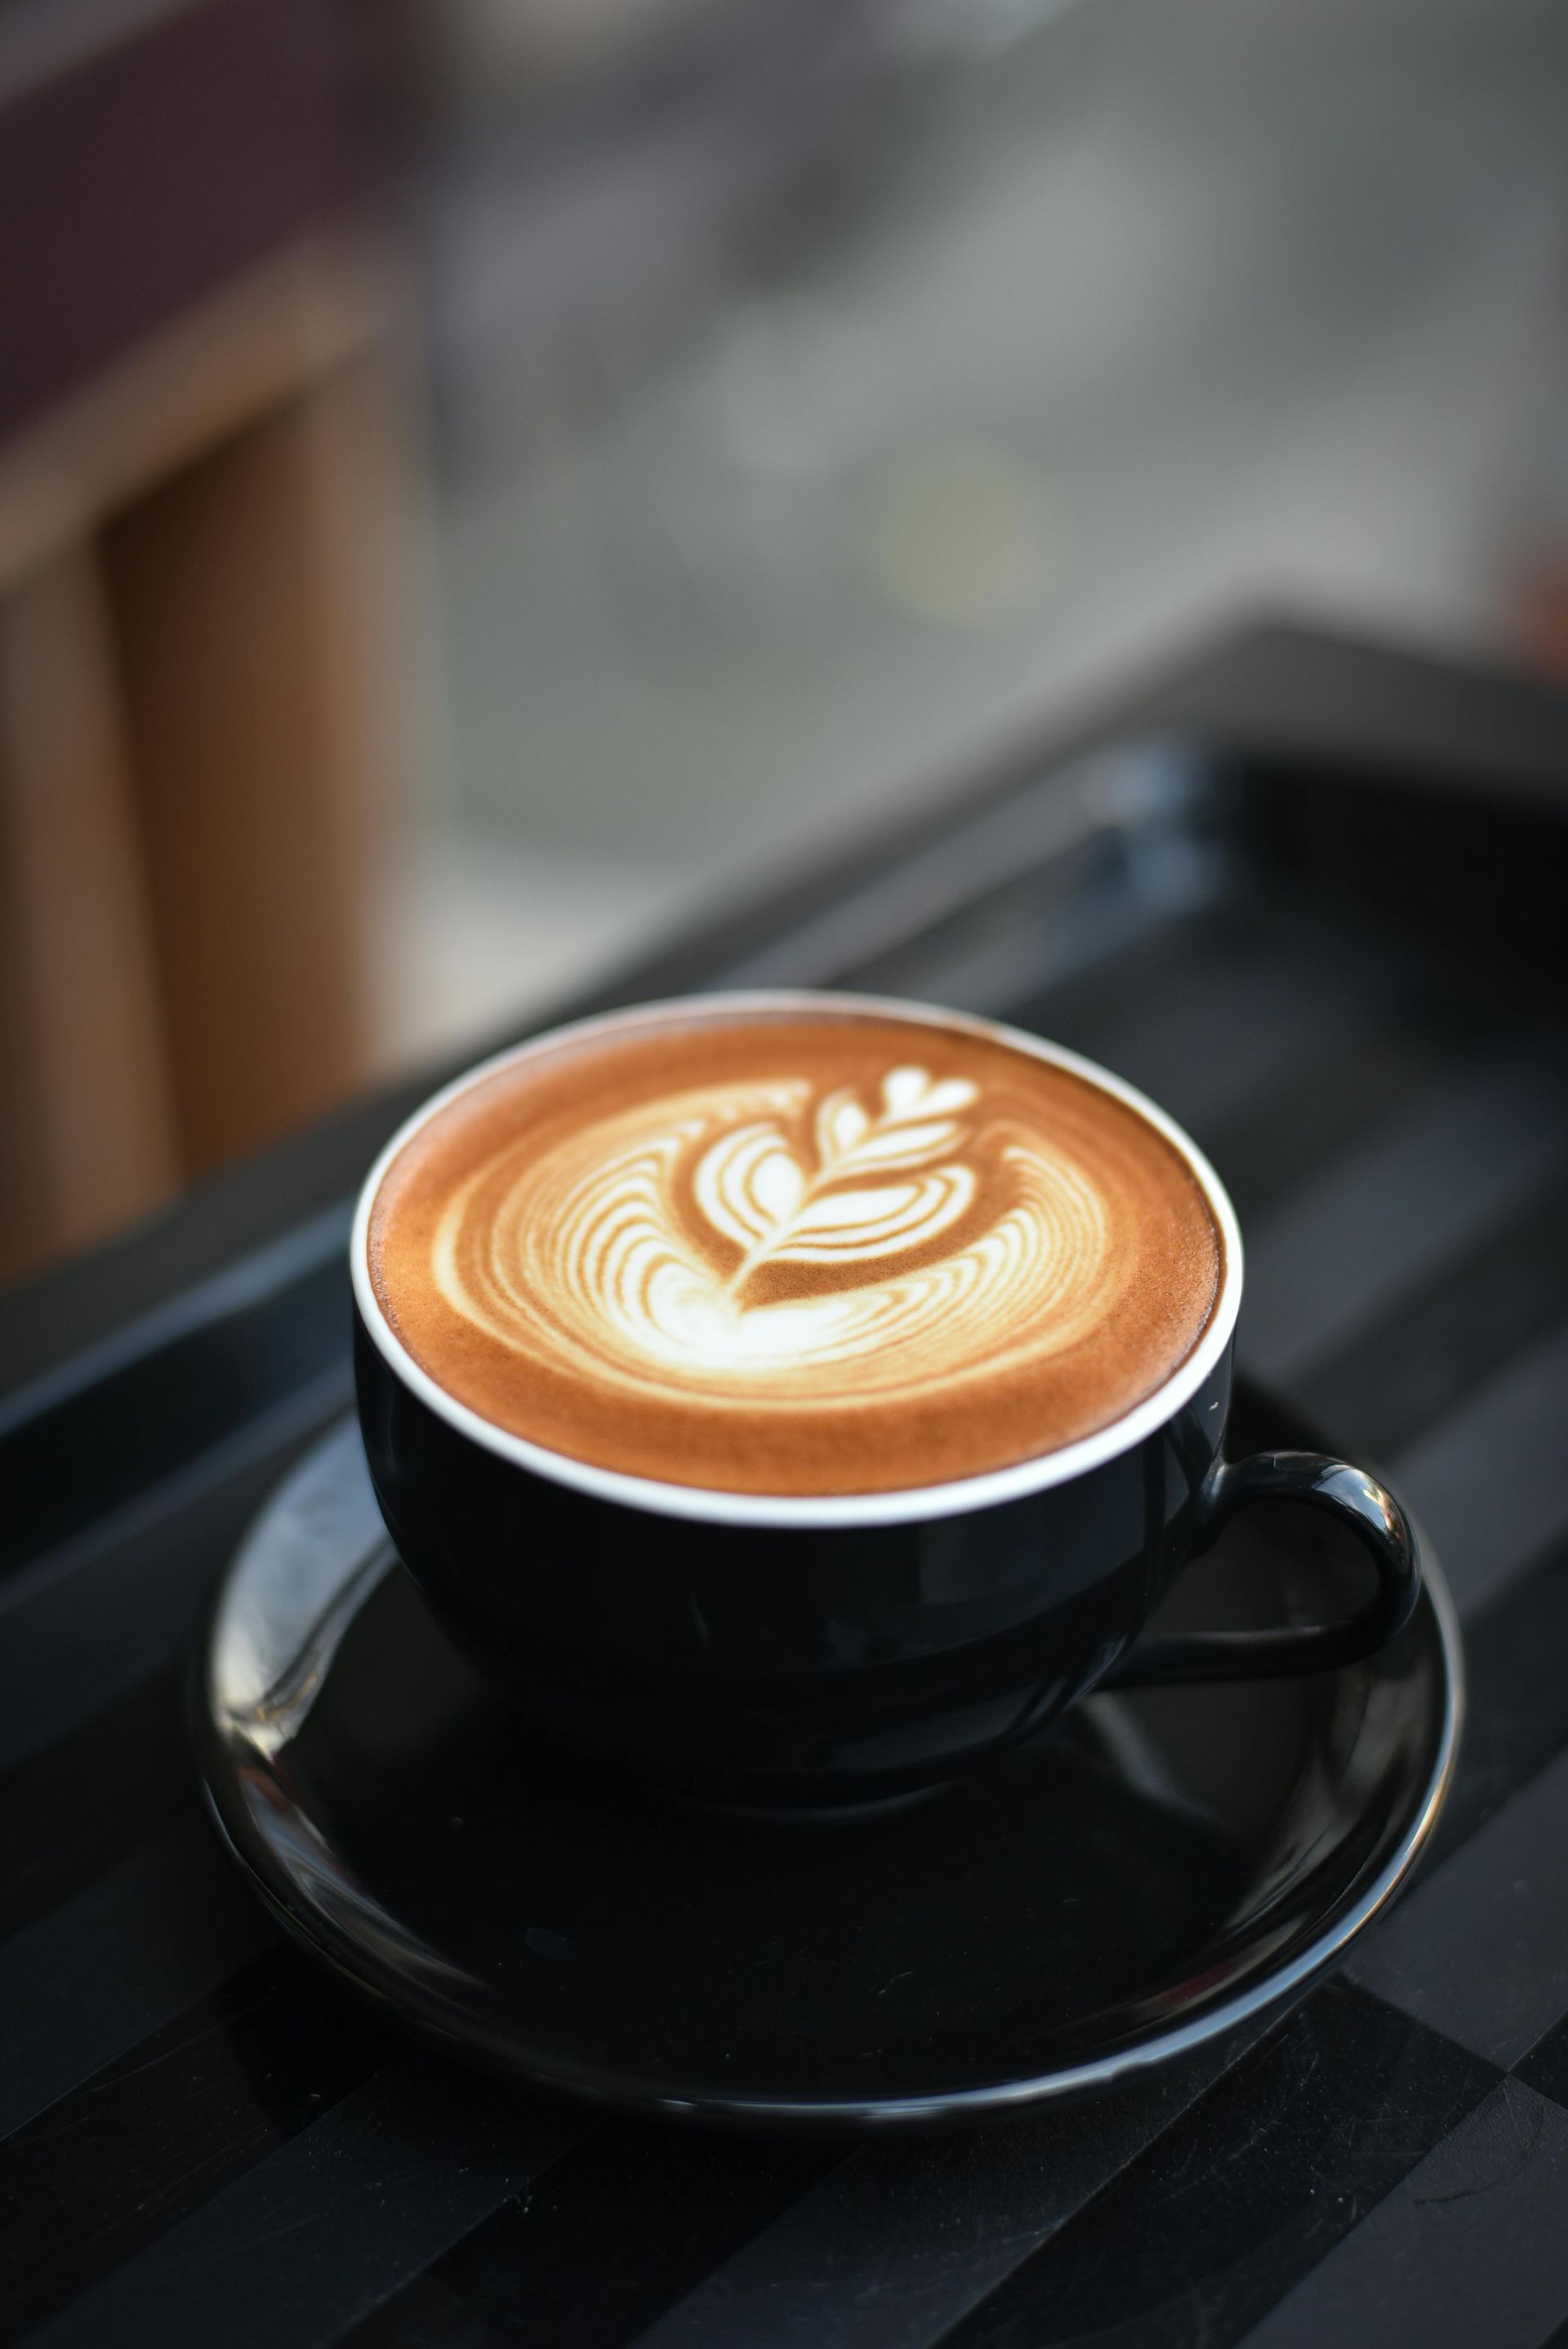 A close up image of a coffee with heart shaped coffee art.